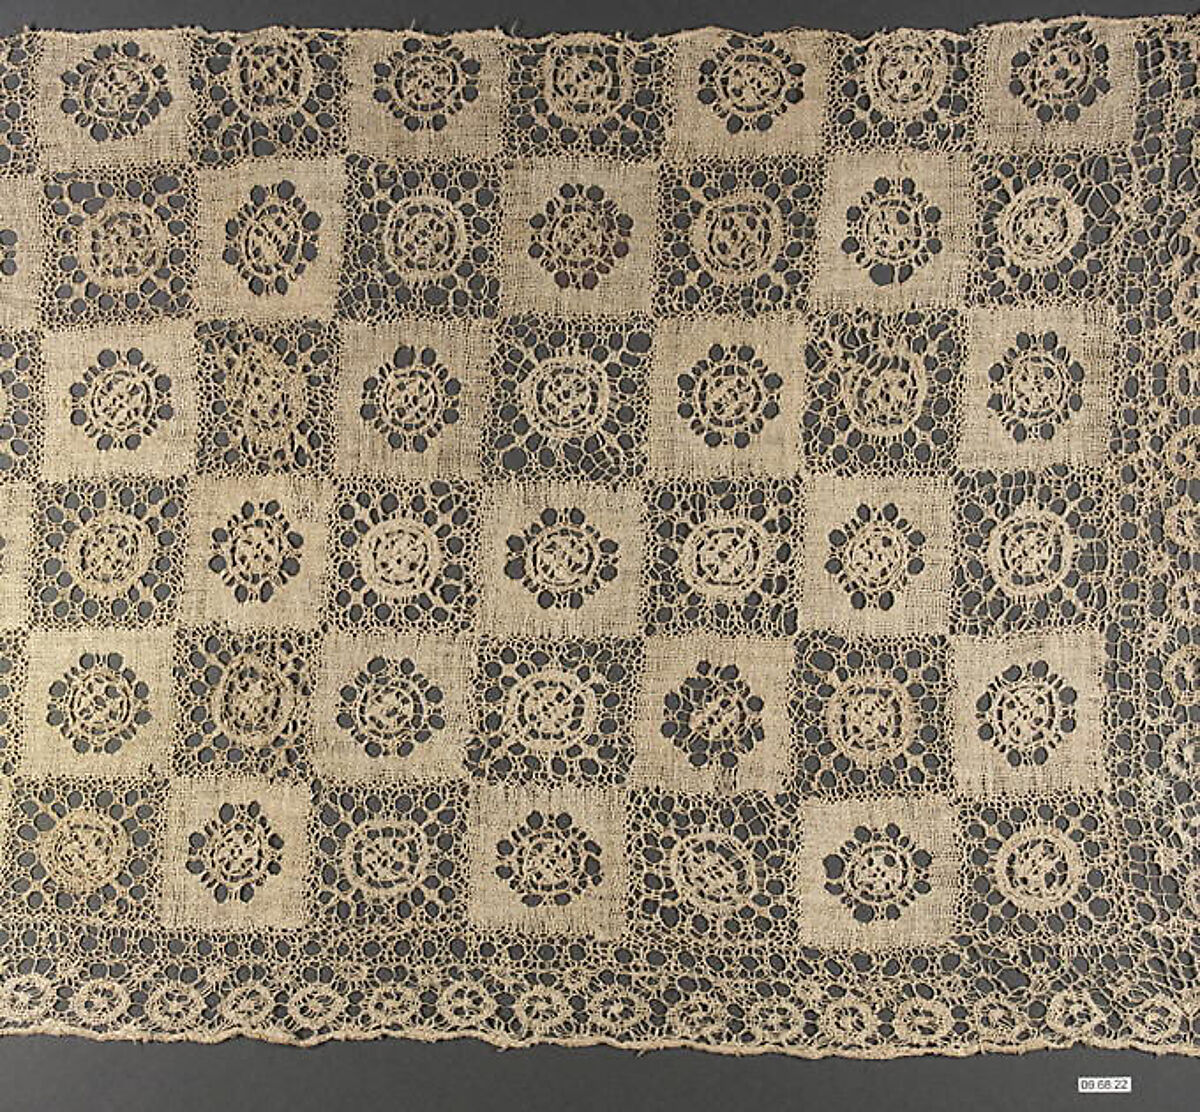 Cover fragment, Embroidered net, German or Swiss 